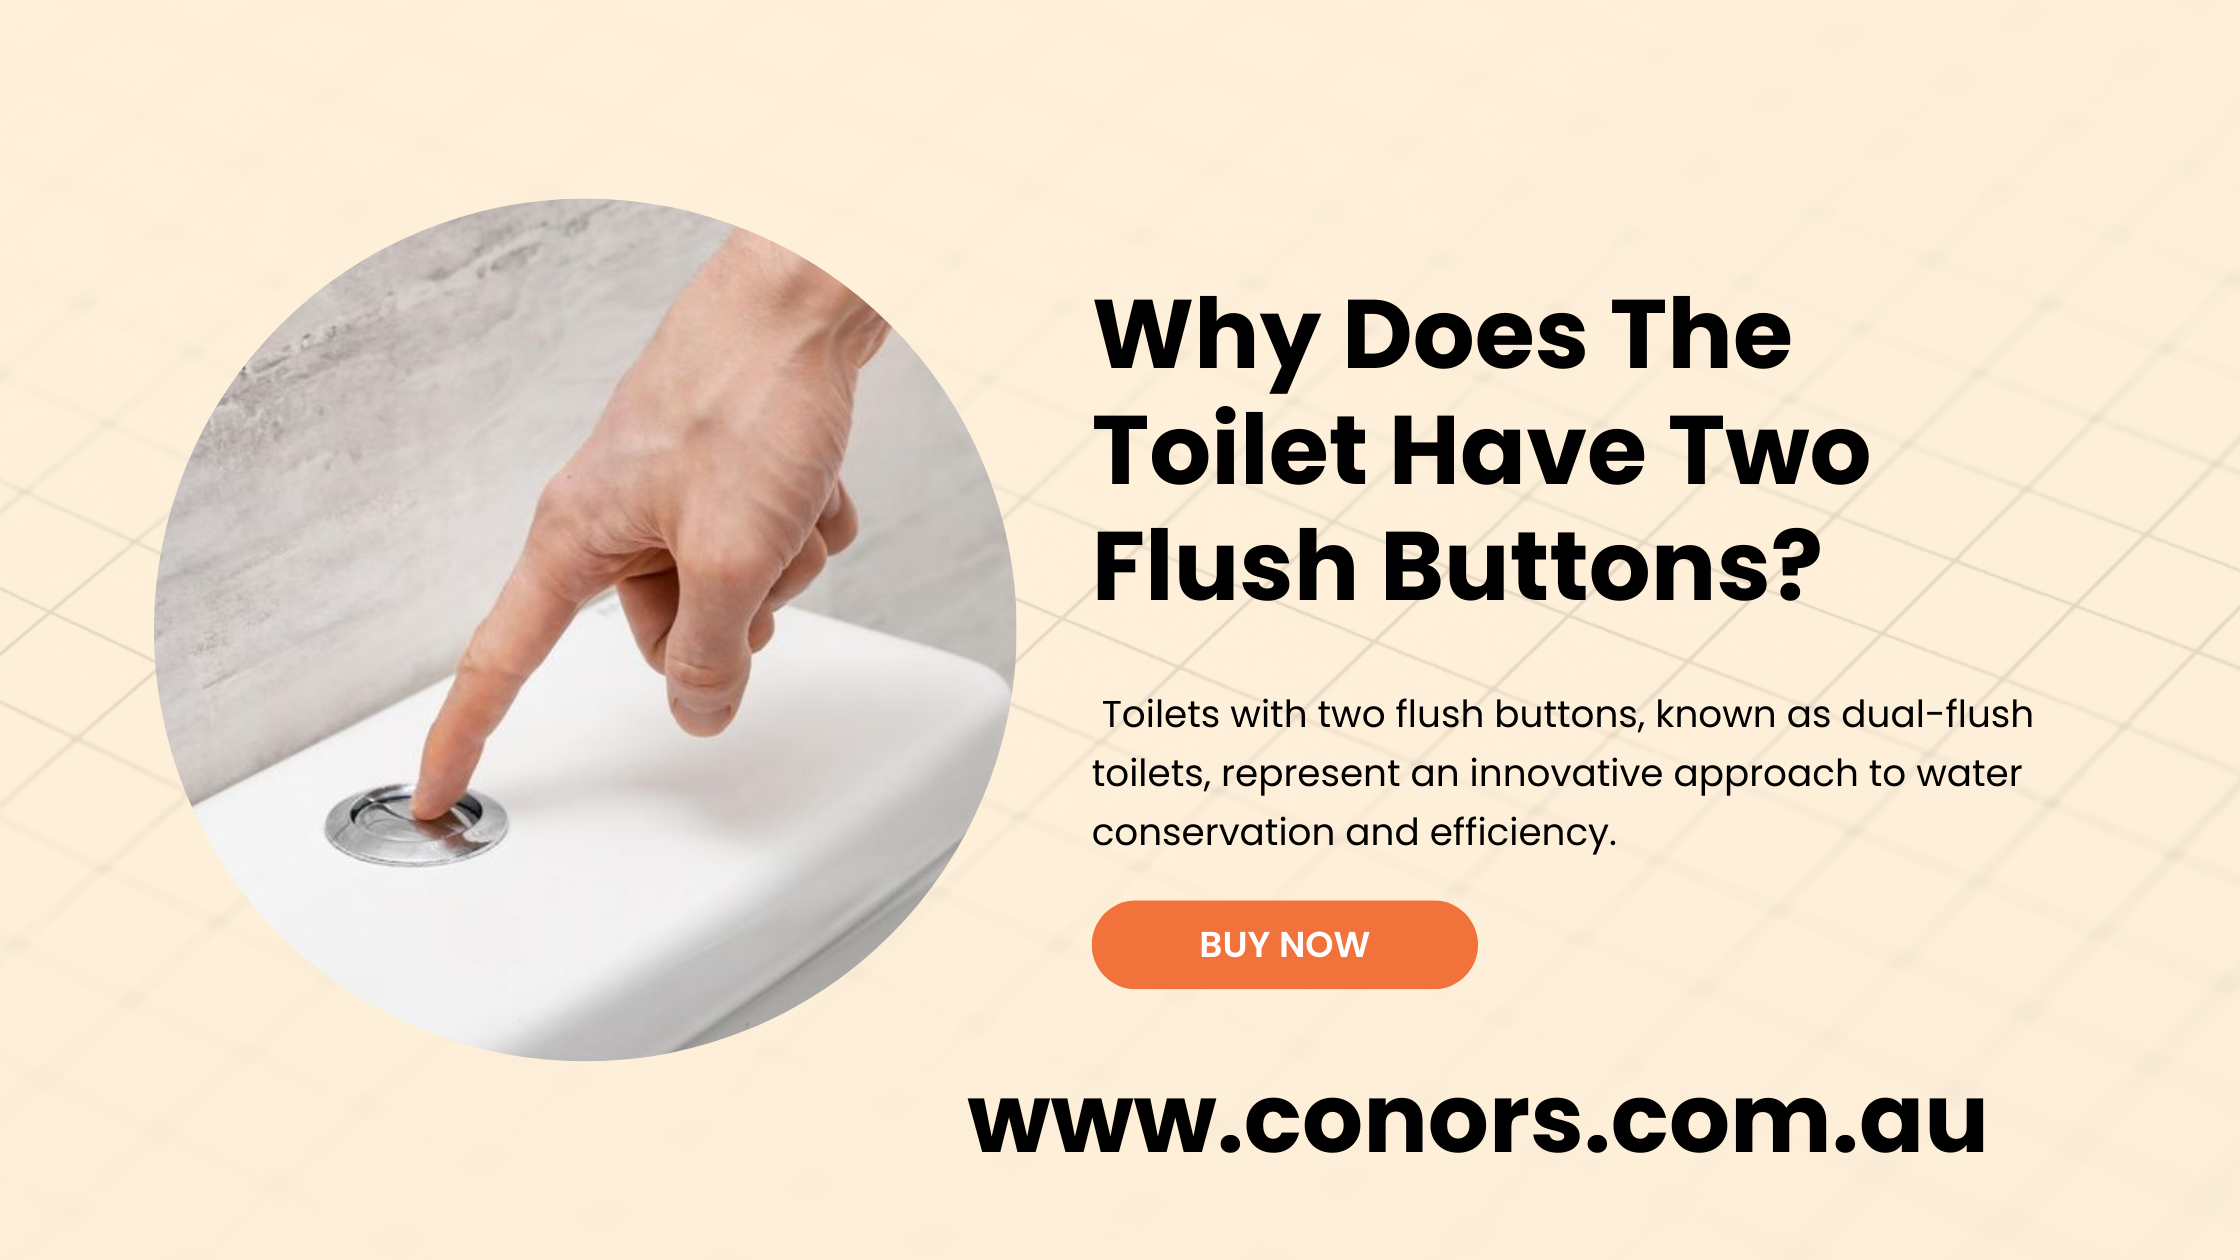 Why Does The Toilet Have Two Flush Buttons?